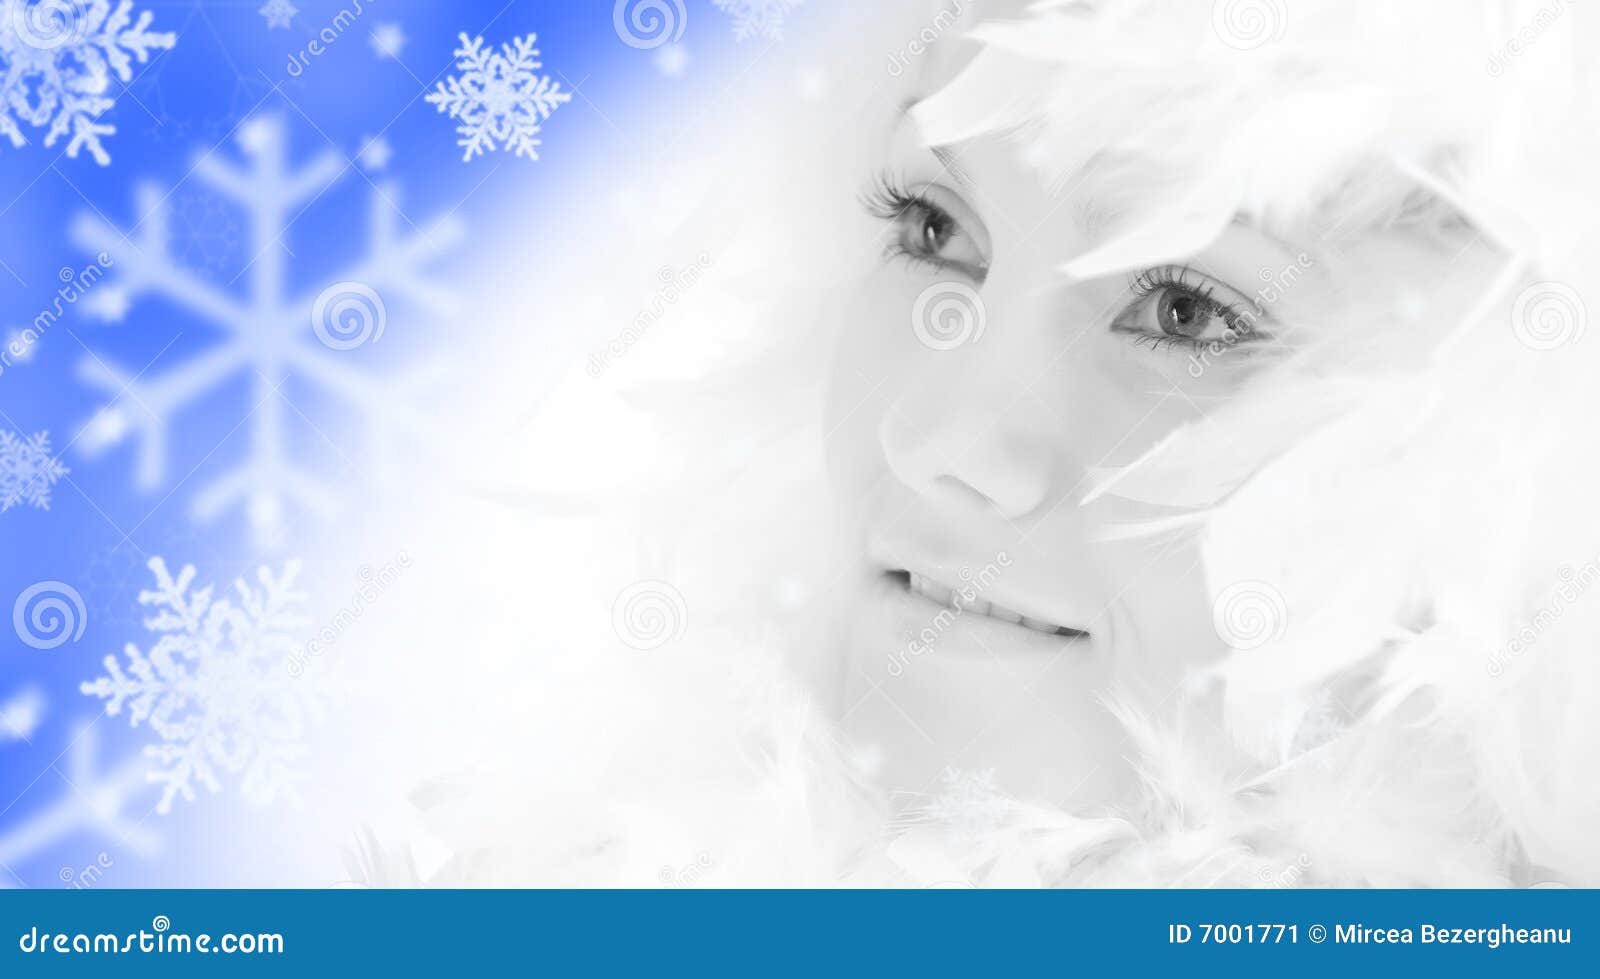 Beautiful Girl With White Feathers Stock Image - Image of human